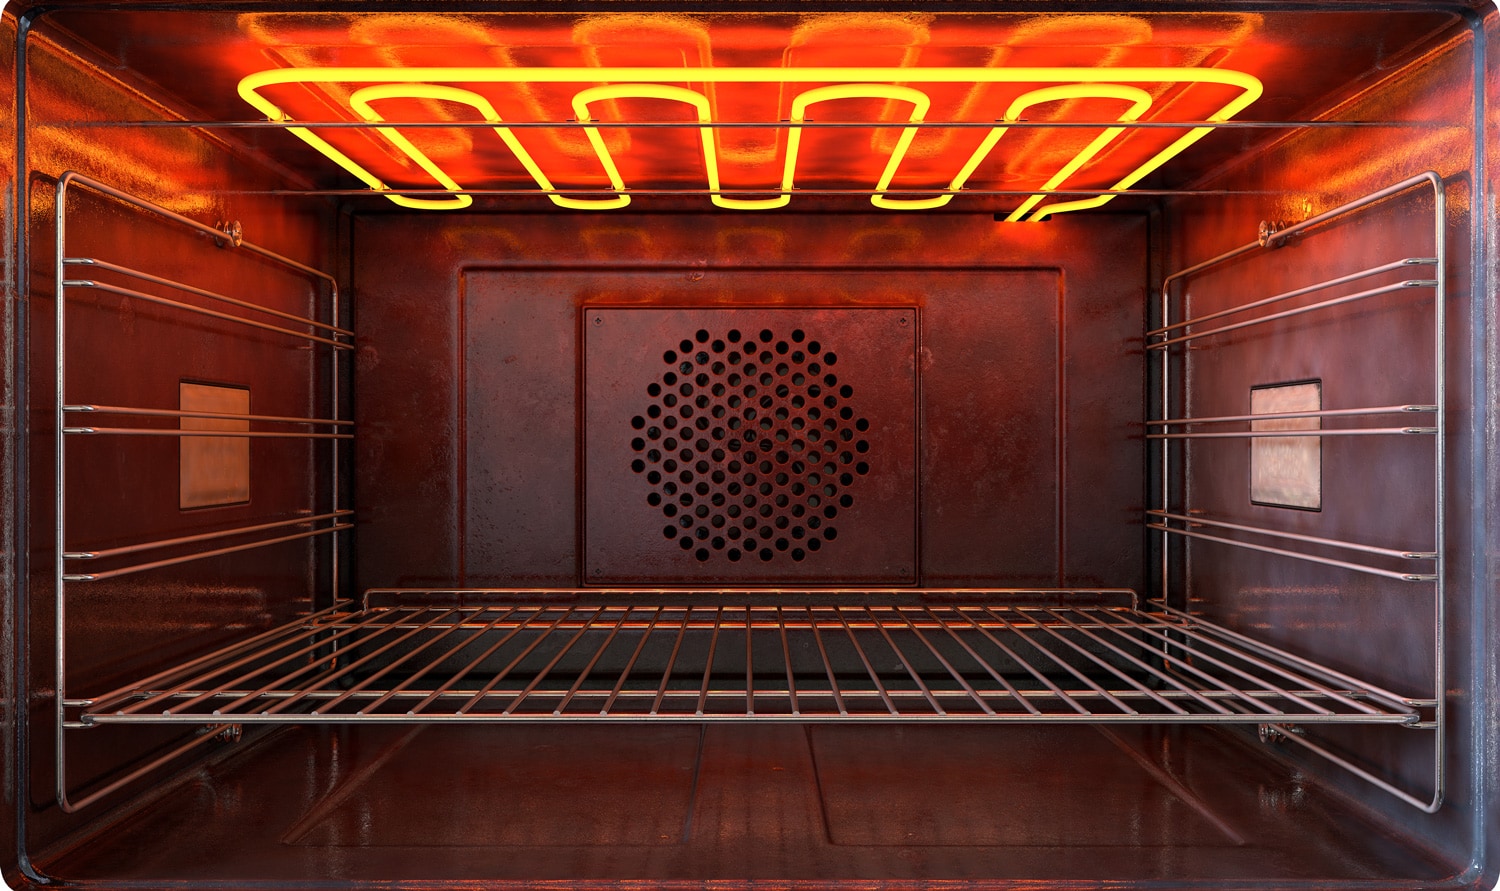 An upclose view through the front of the inside of an empty hot operational household oven with a glowing element and metal rack